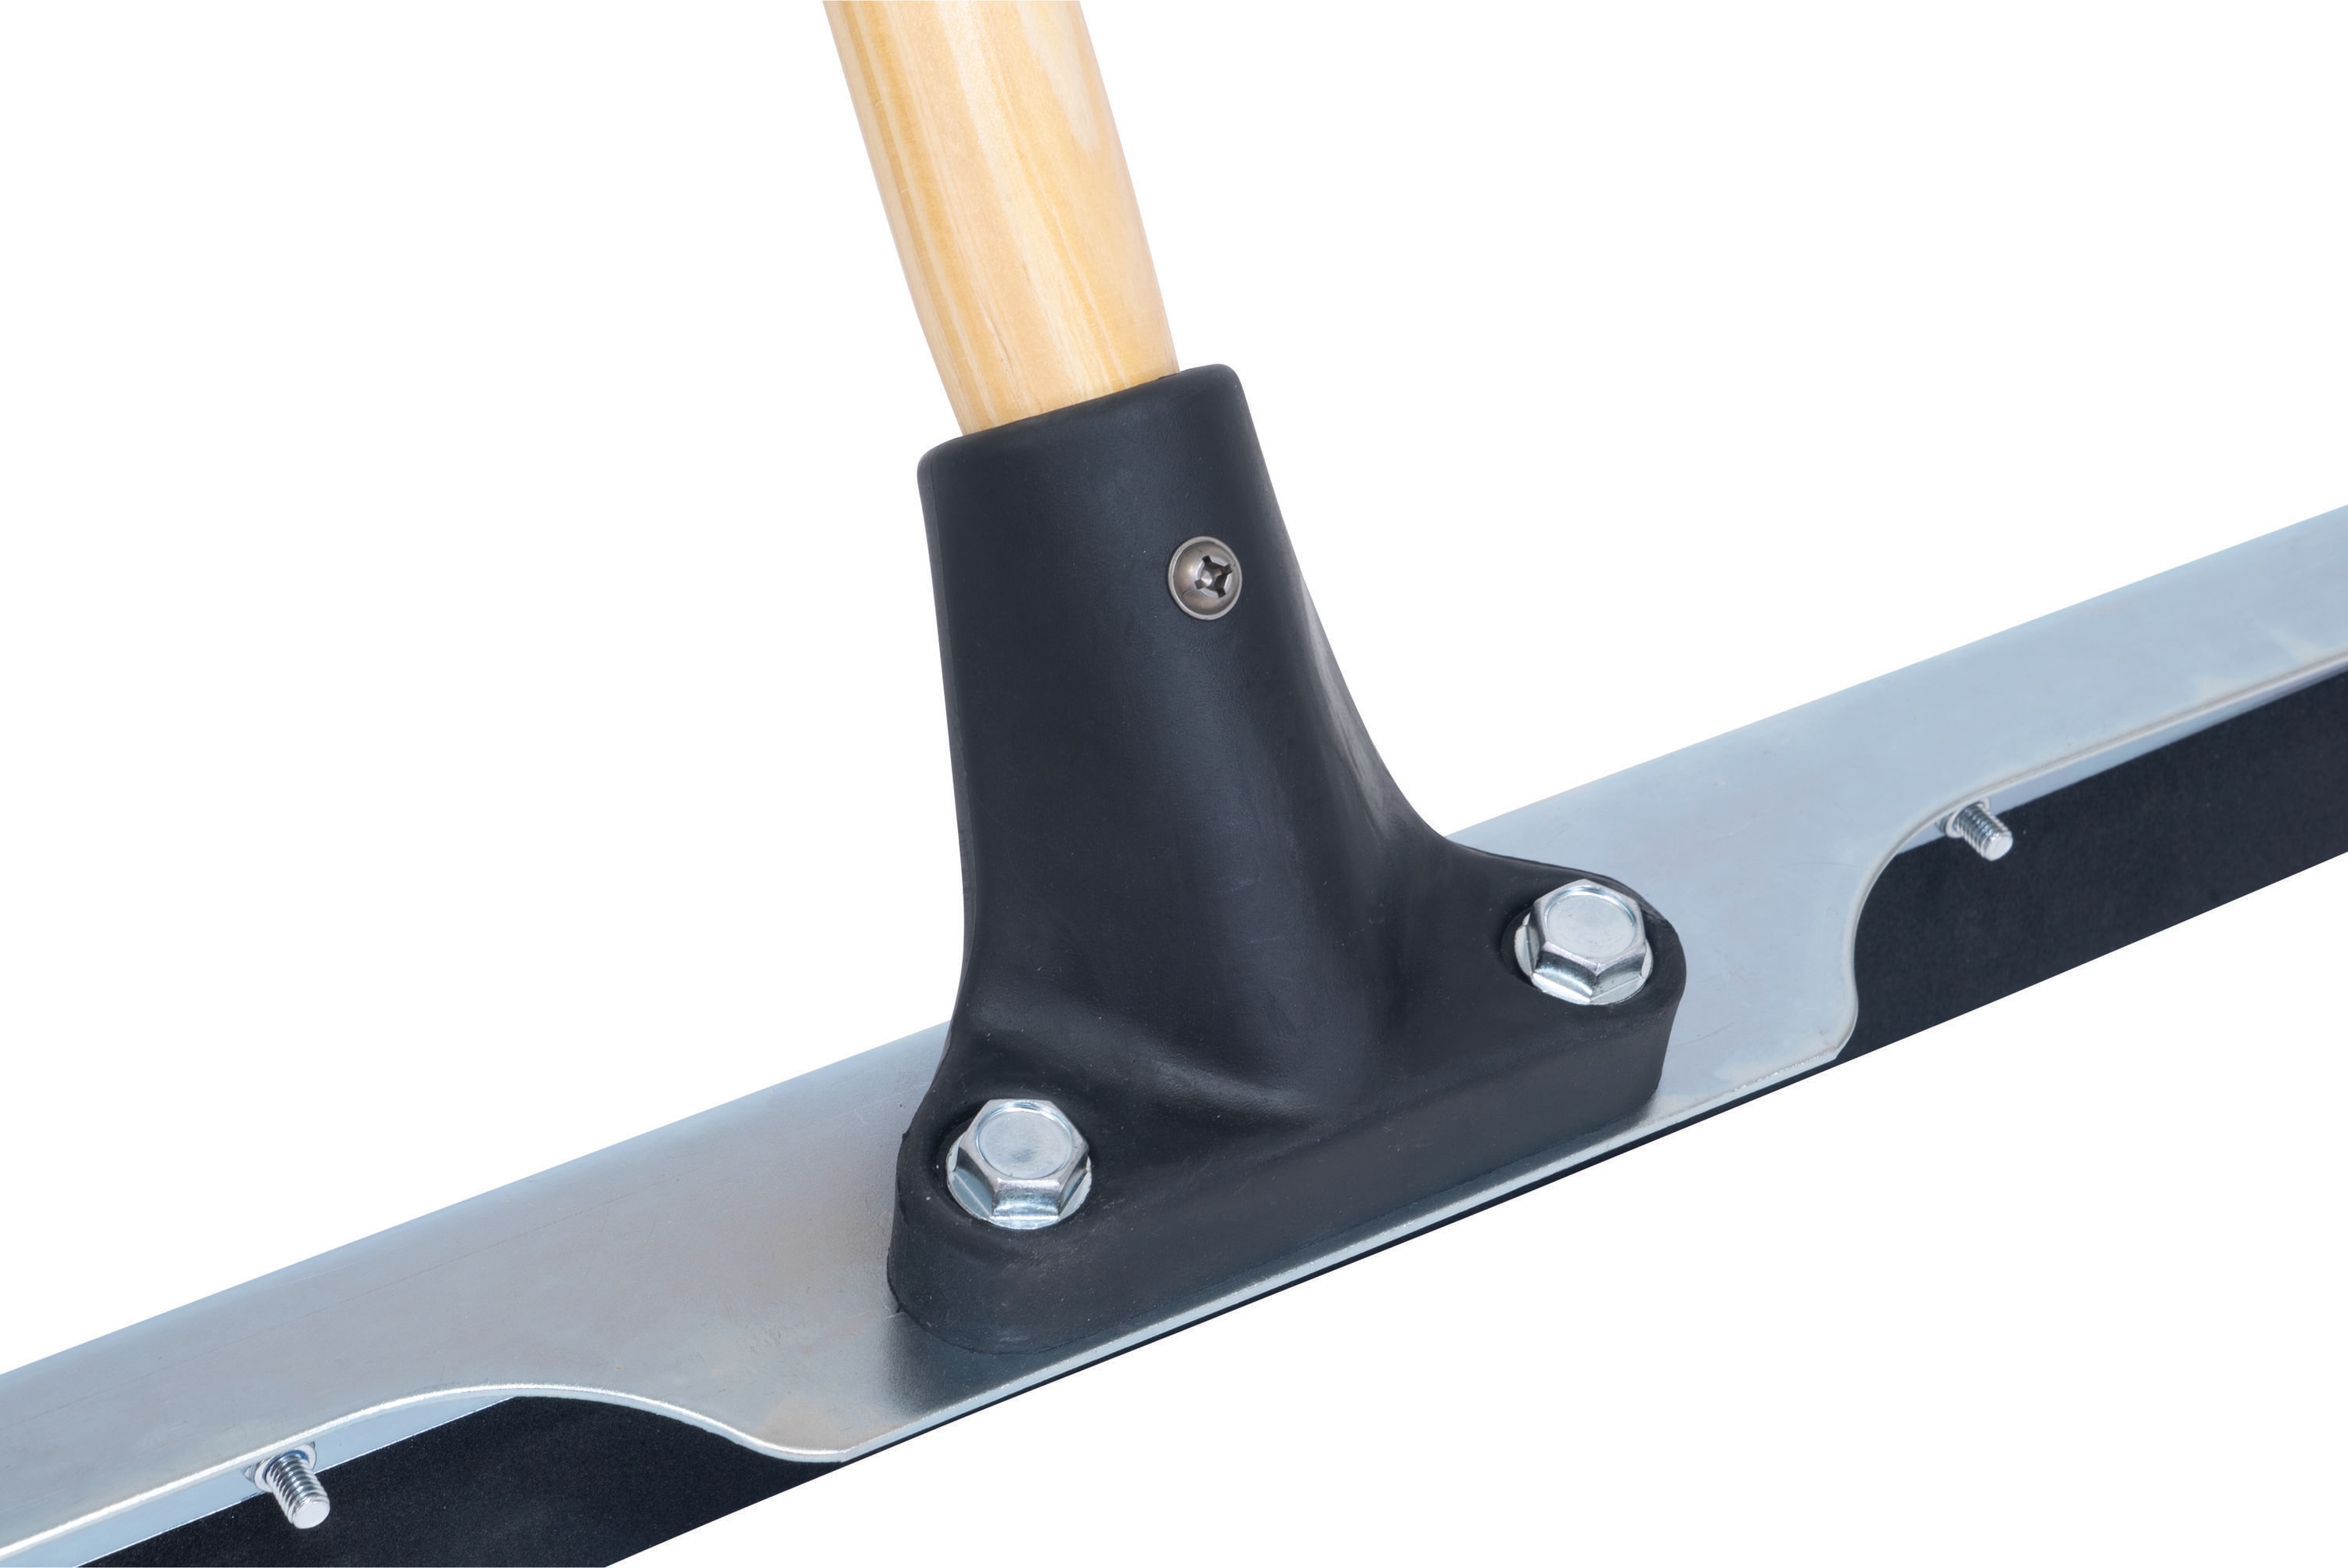 Craftsman Wet Squeegee/Dry Brush Combo